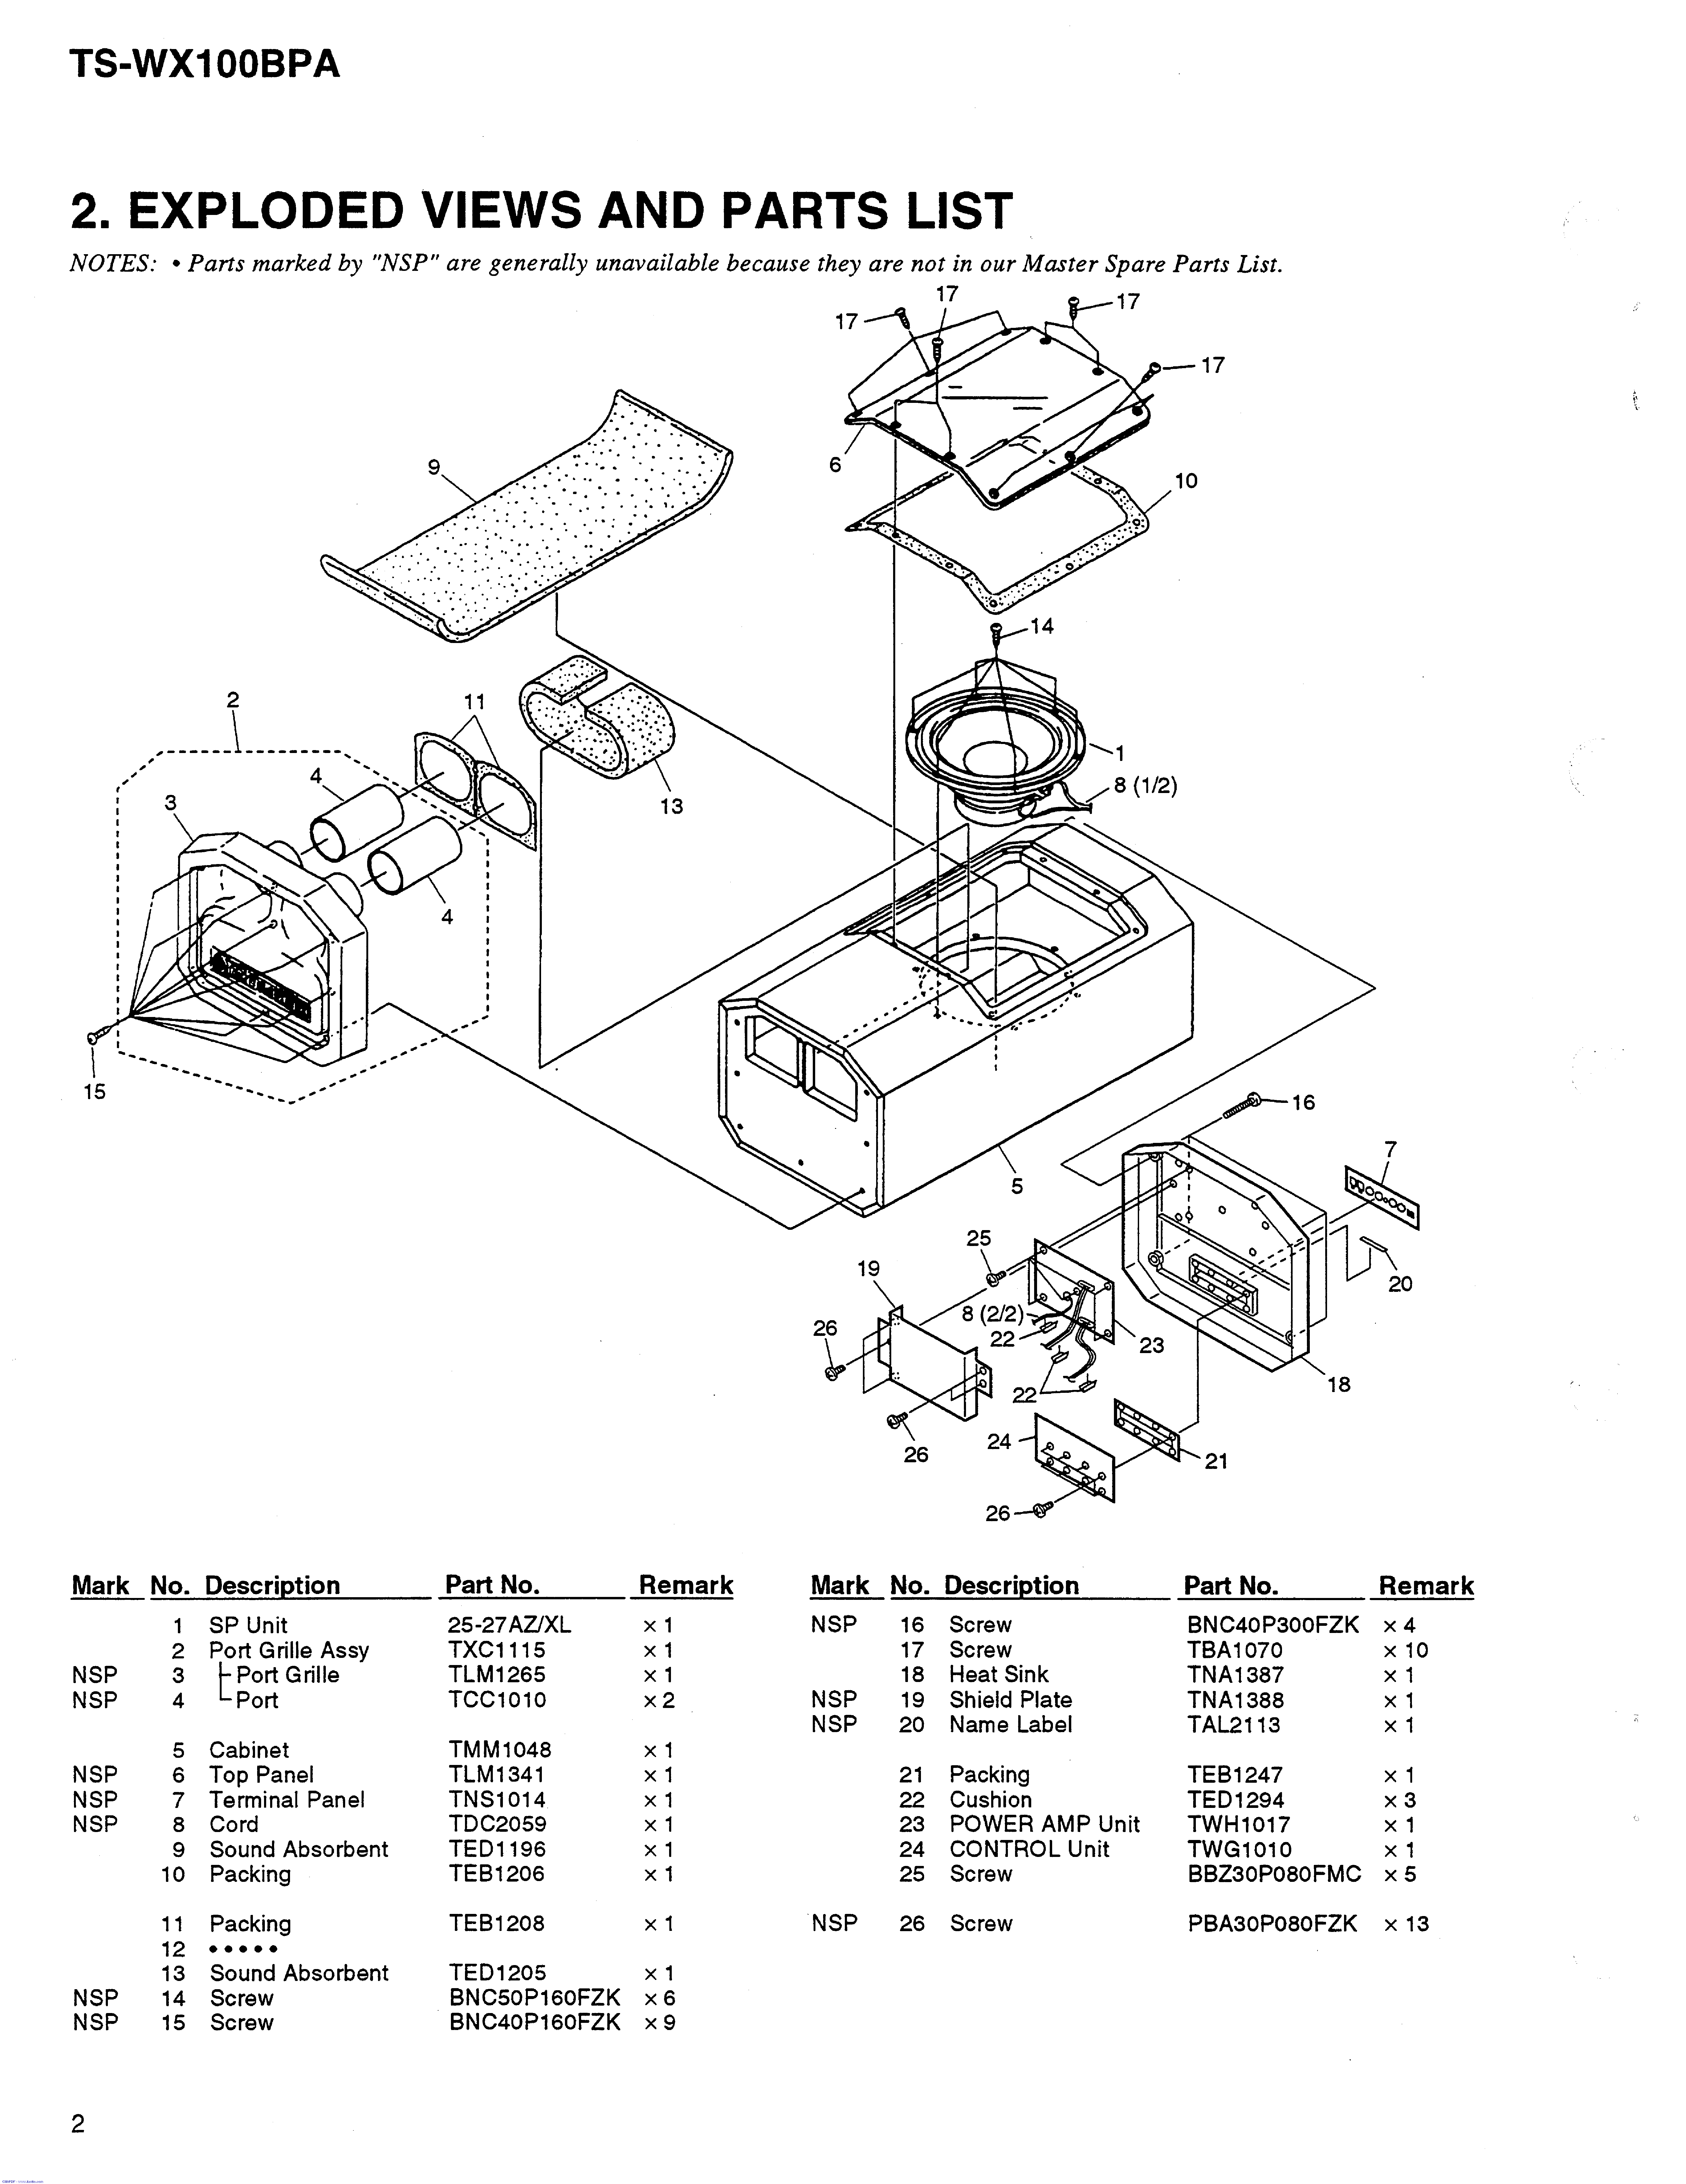 PIONEER TS-WX100 SM service manual (2nd page)